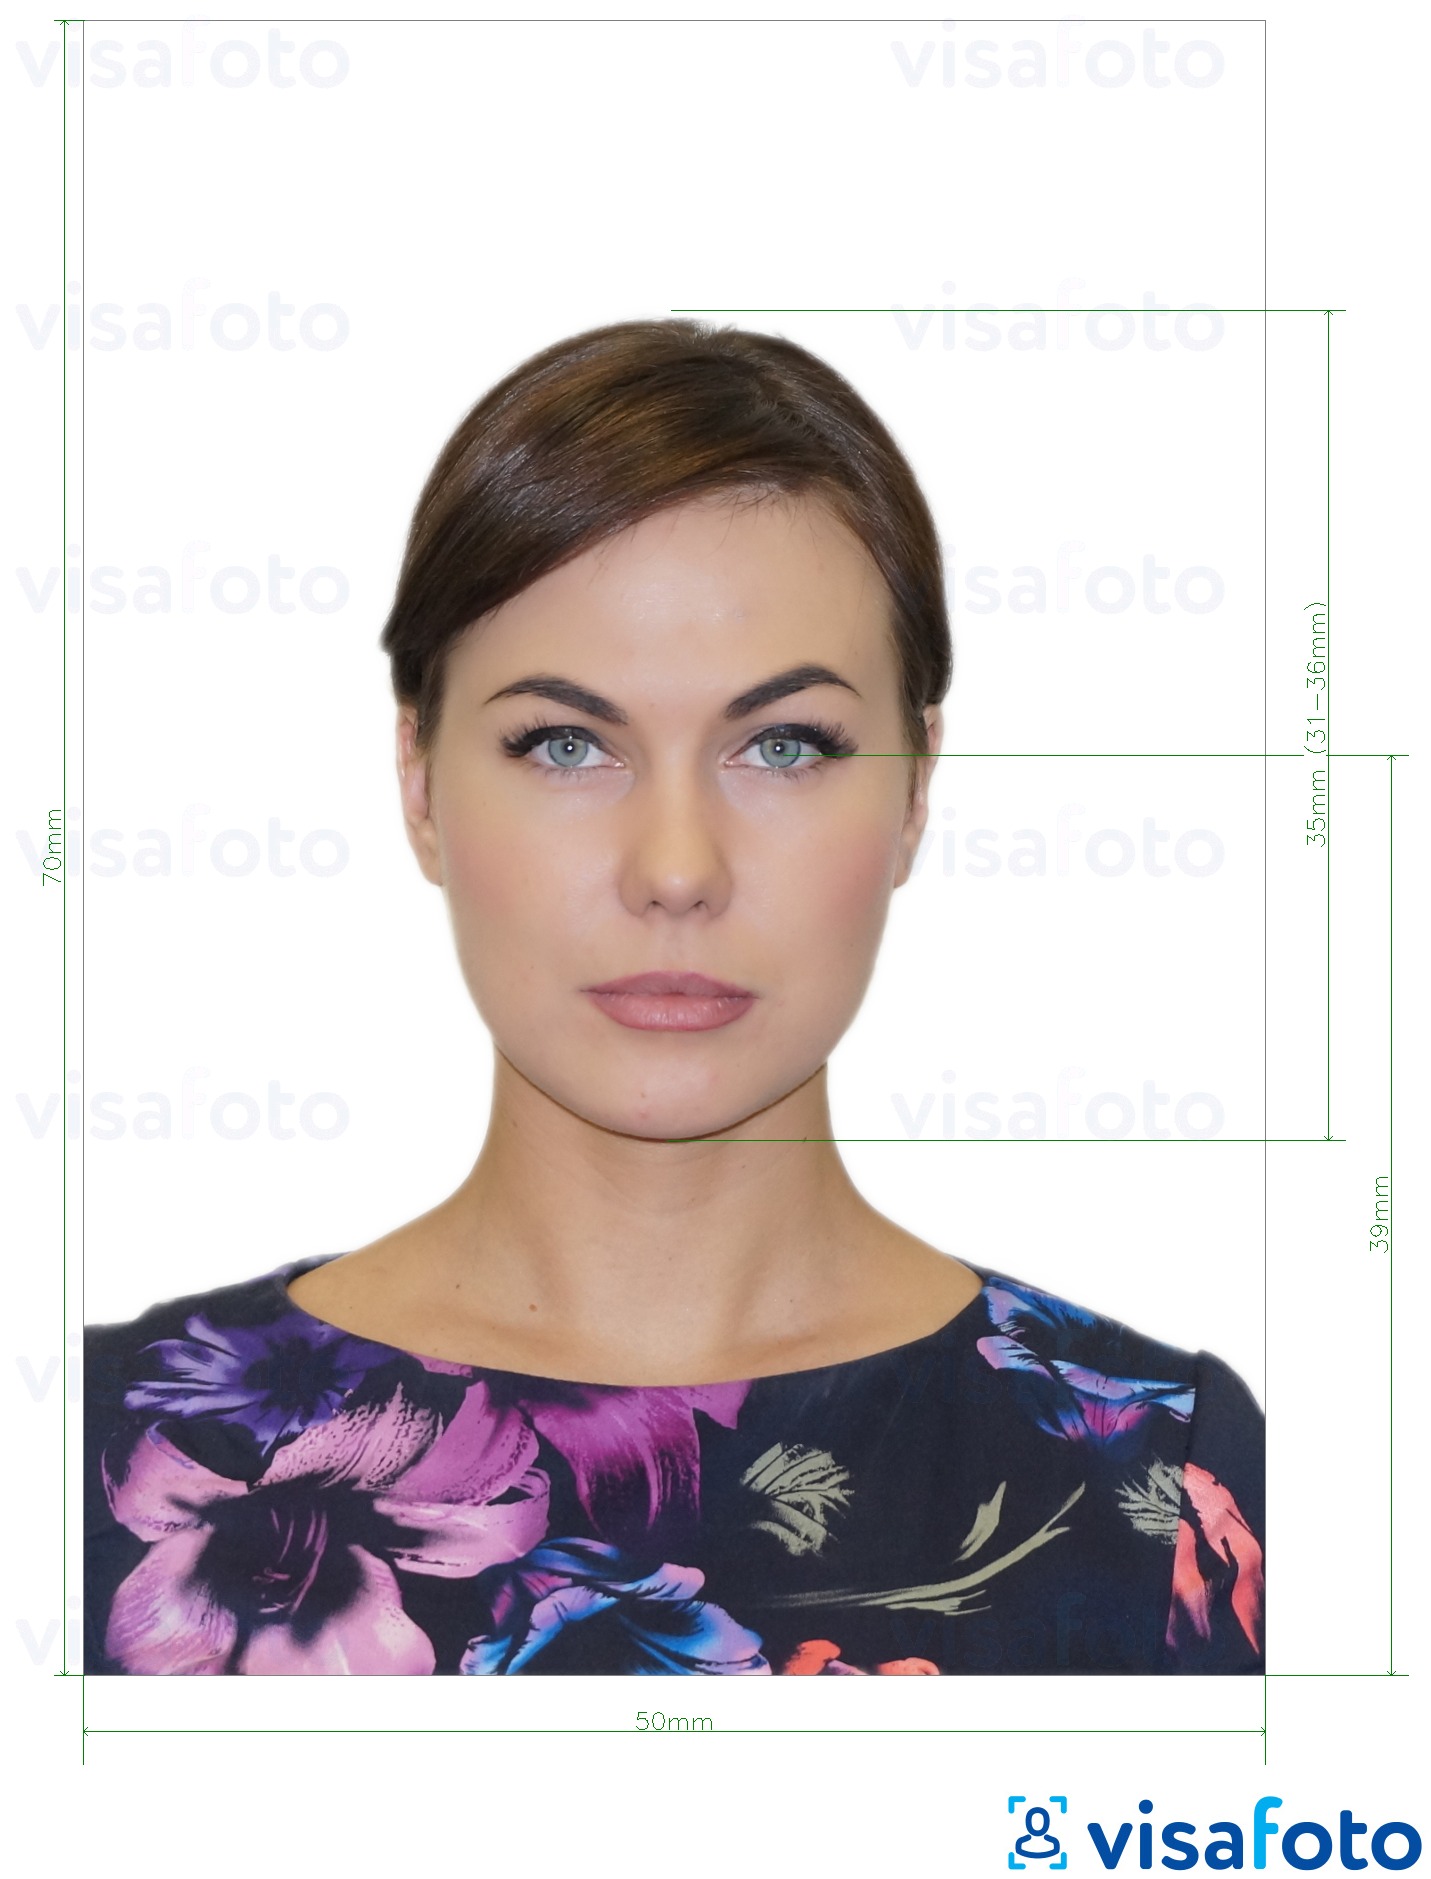 Example of photo for Canada Permanent Resident Card 5x7 cm (715x1000 - 2000x2800) with exact size specification